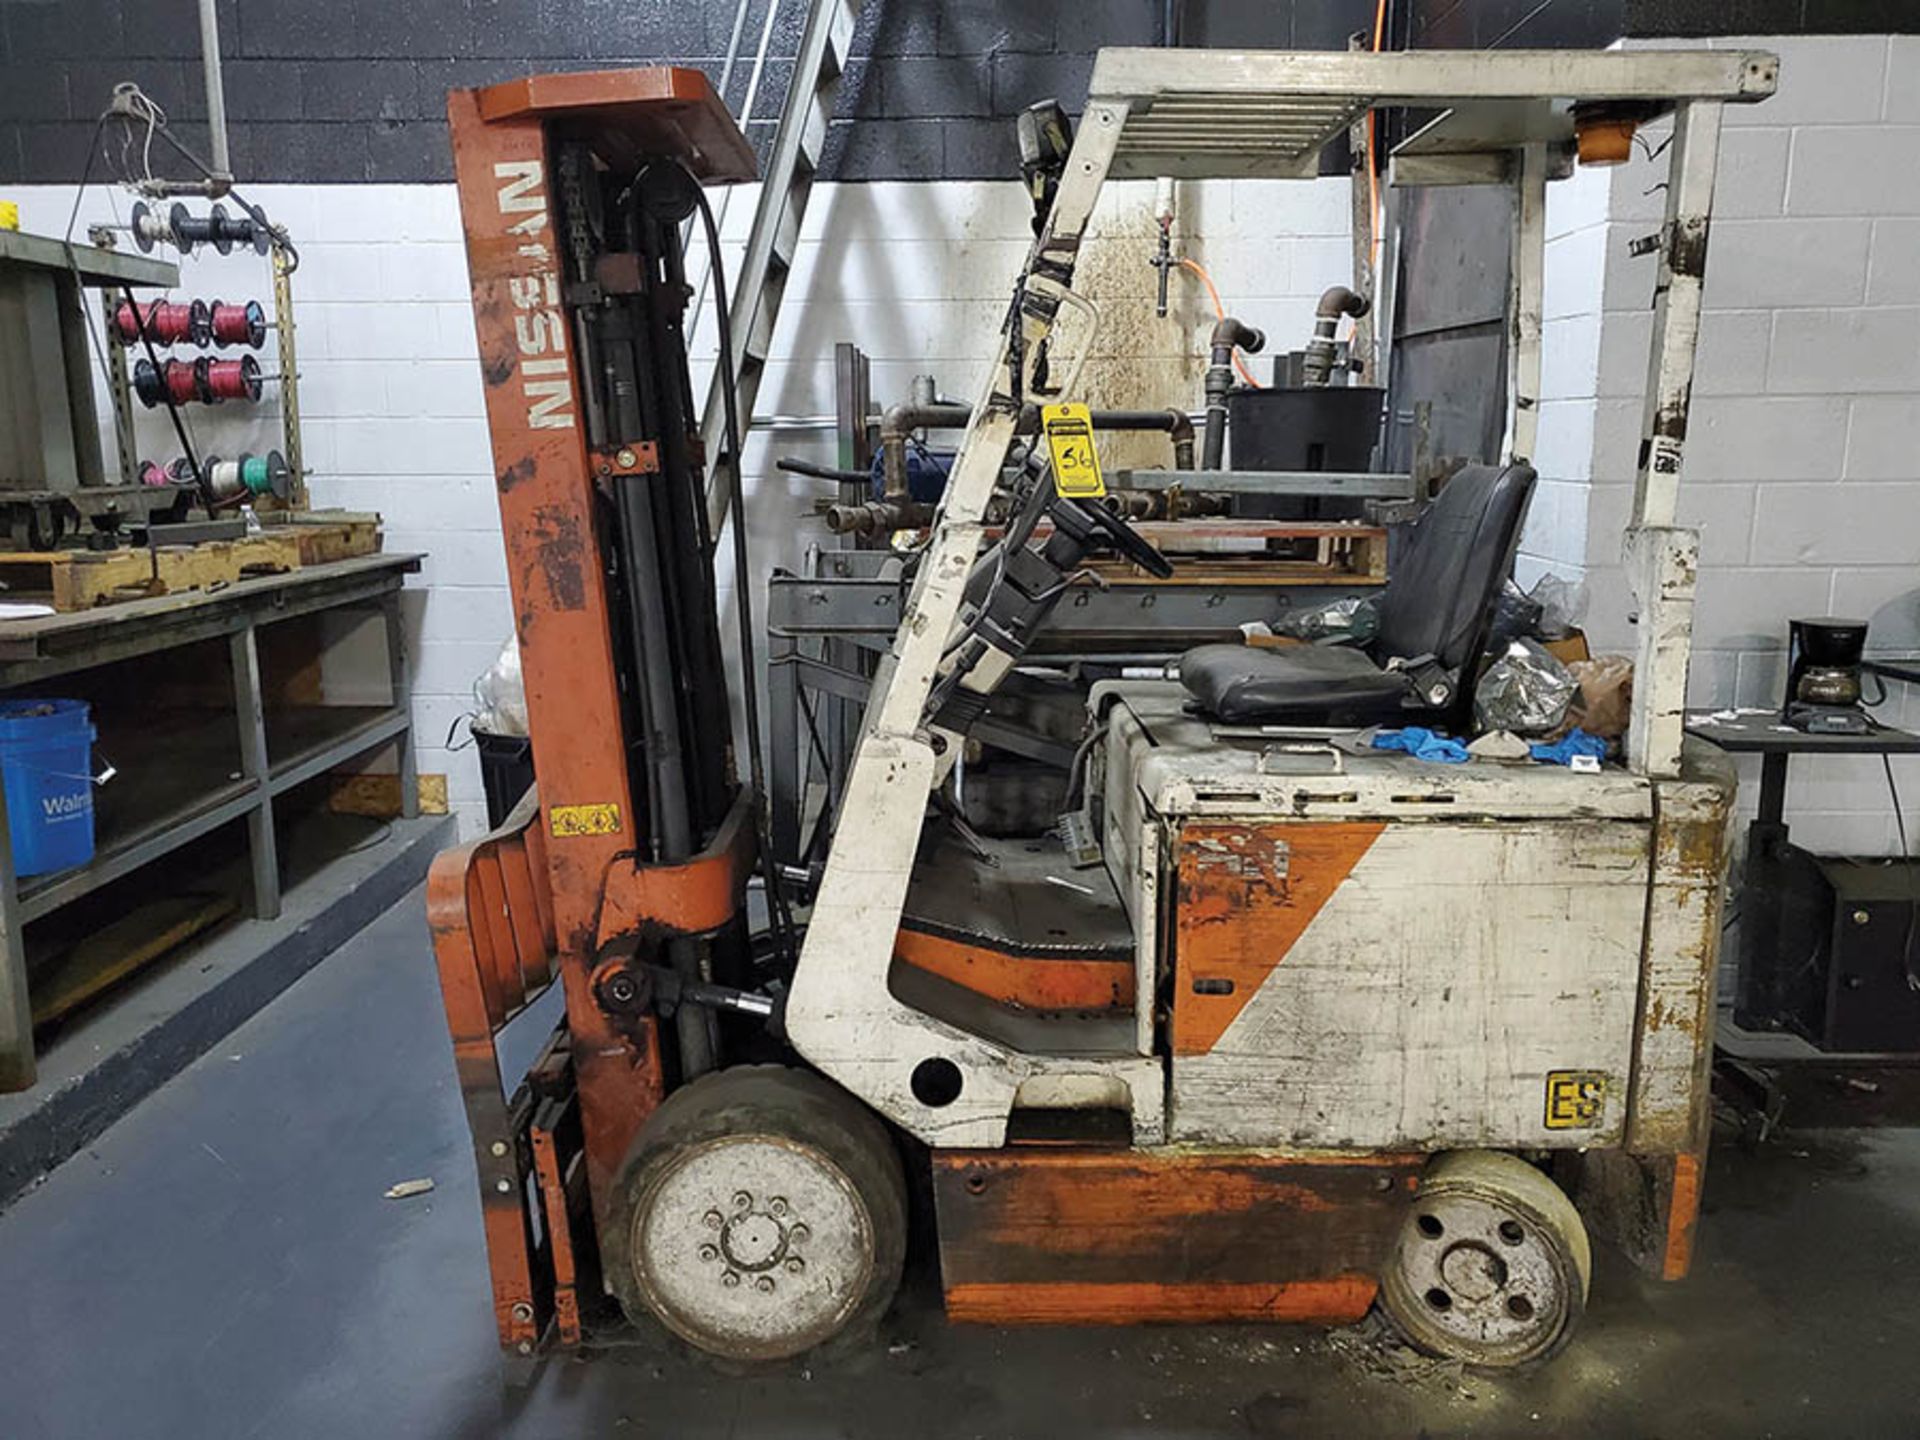 NISSAN 4,700 ELECTRIC FORKLIFT, 36V, SIDESHIFT, 3 STAGE MAST, SOLID TIRES (NEEDS REPAIR)